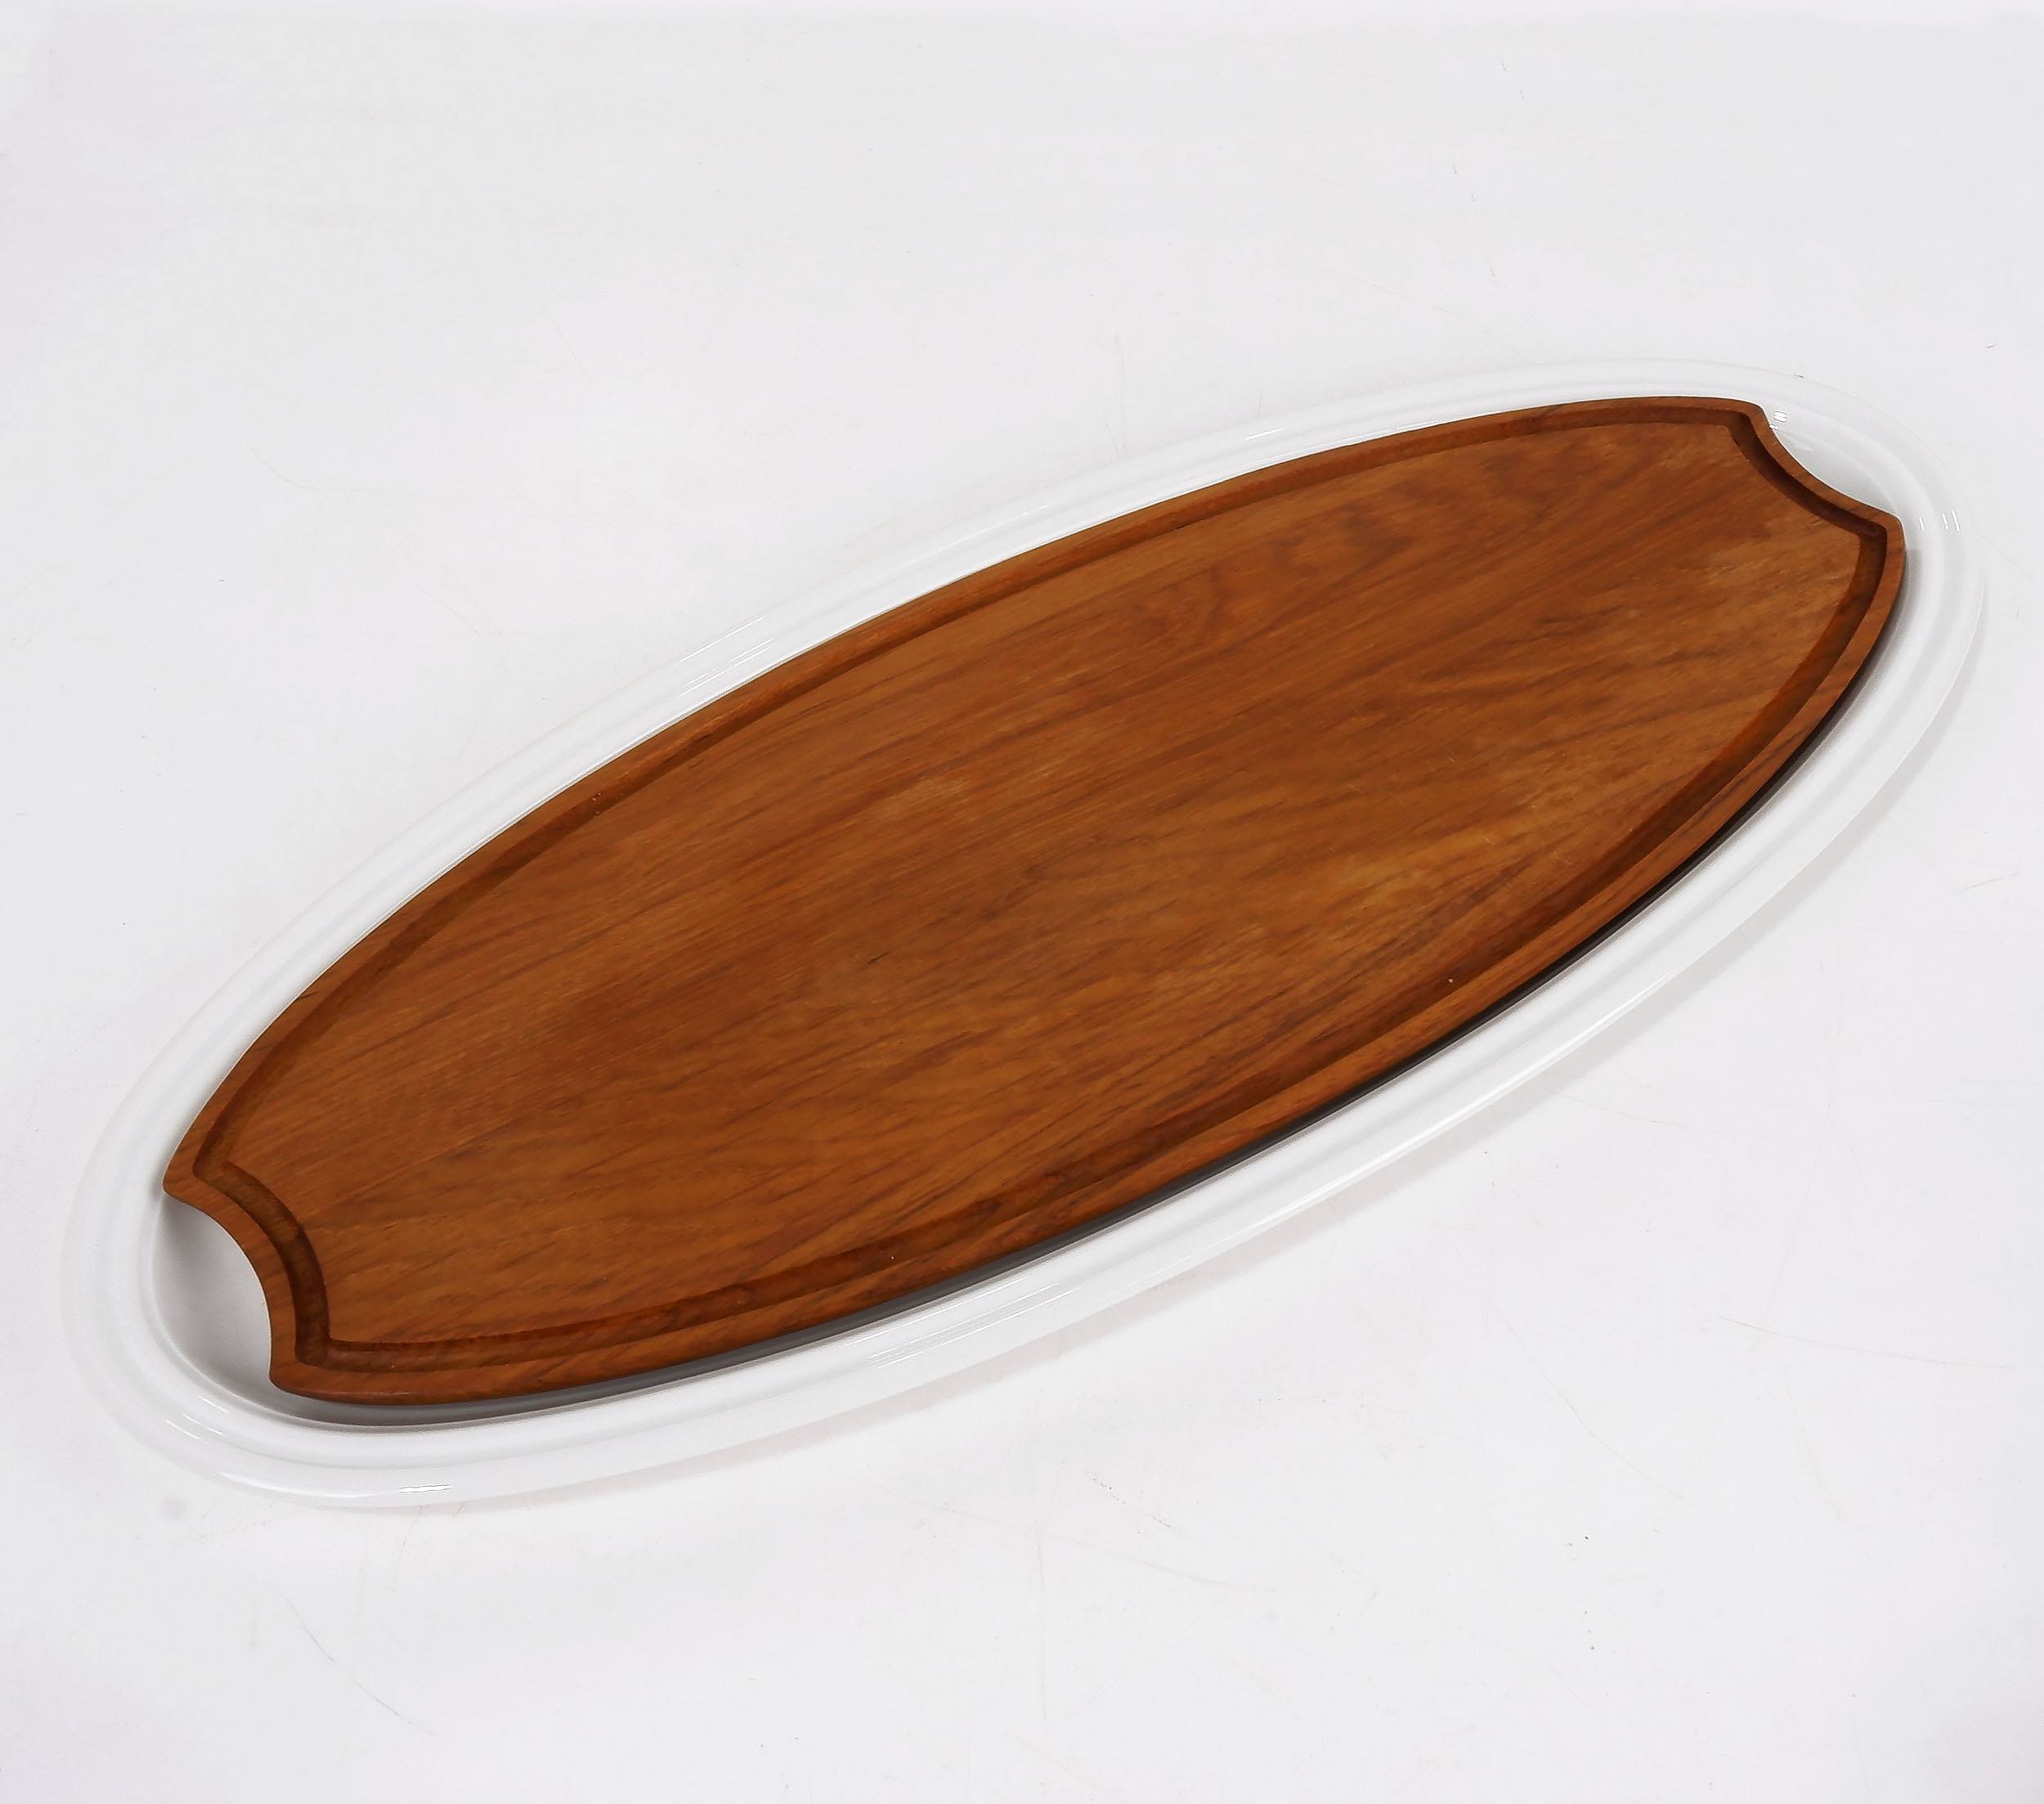 'Rosthenal Studio-Line Serving Tray with Wooden Cutting Board'